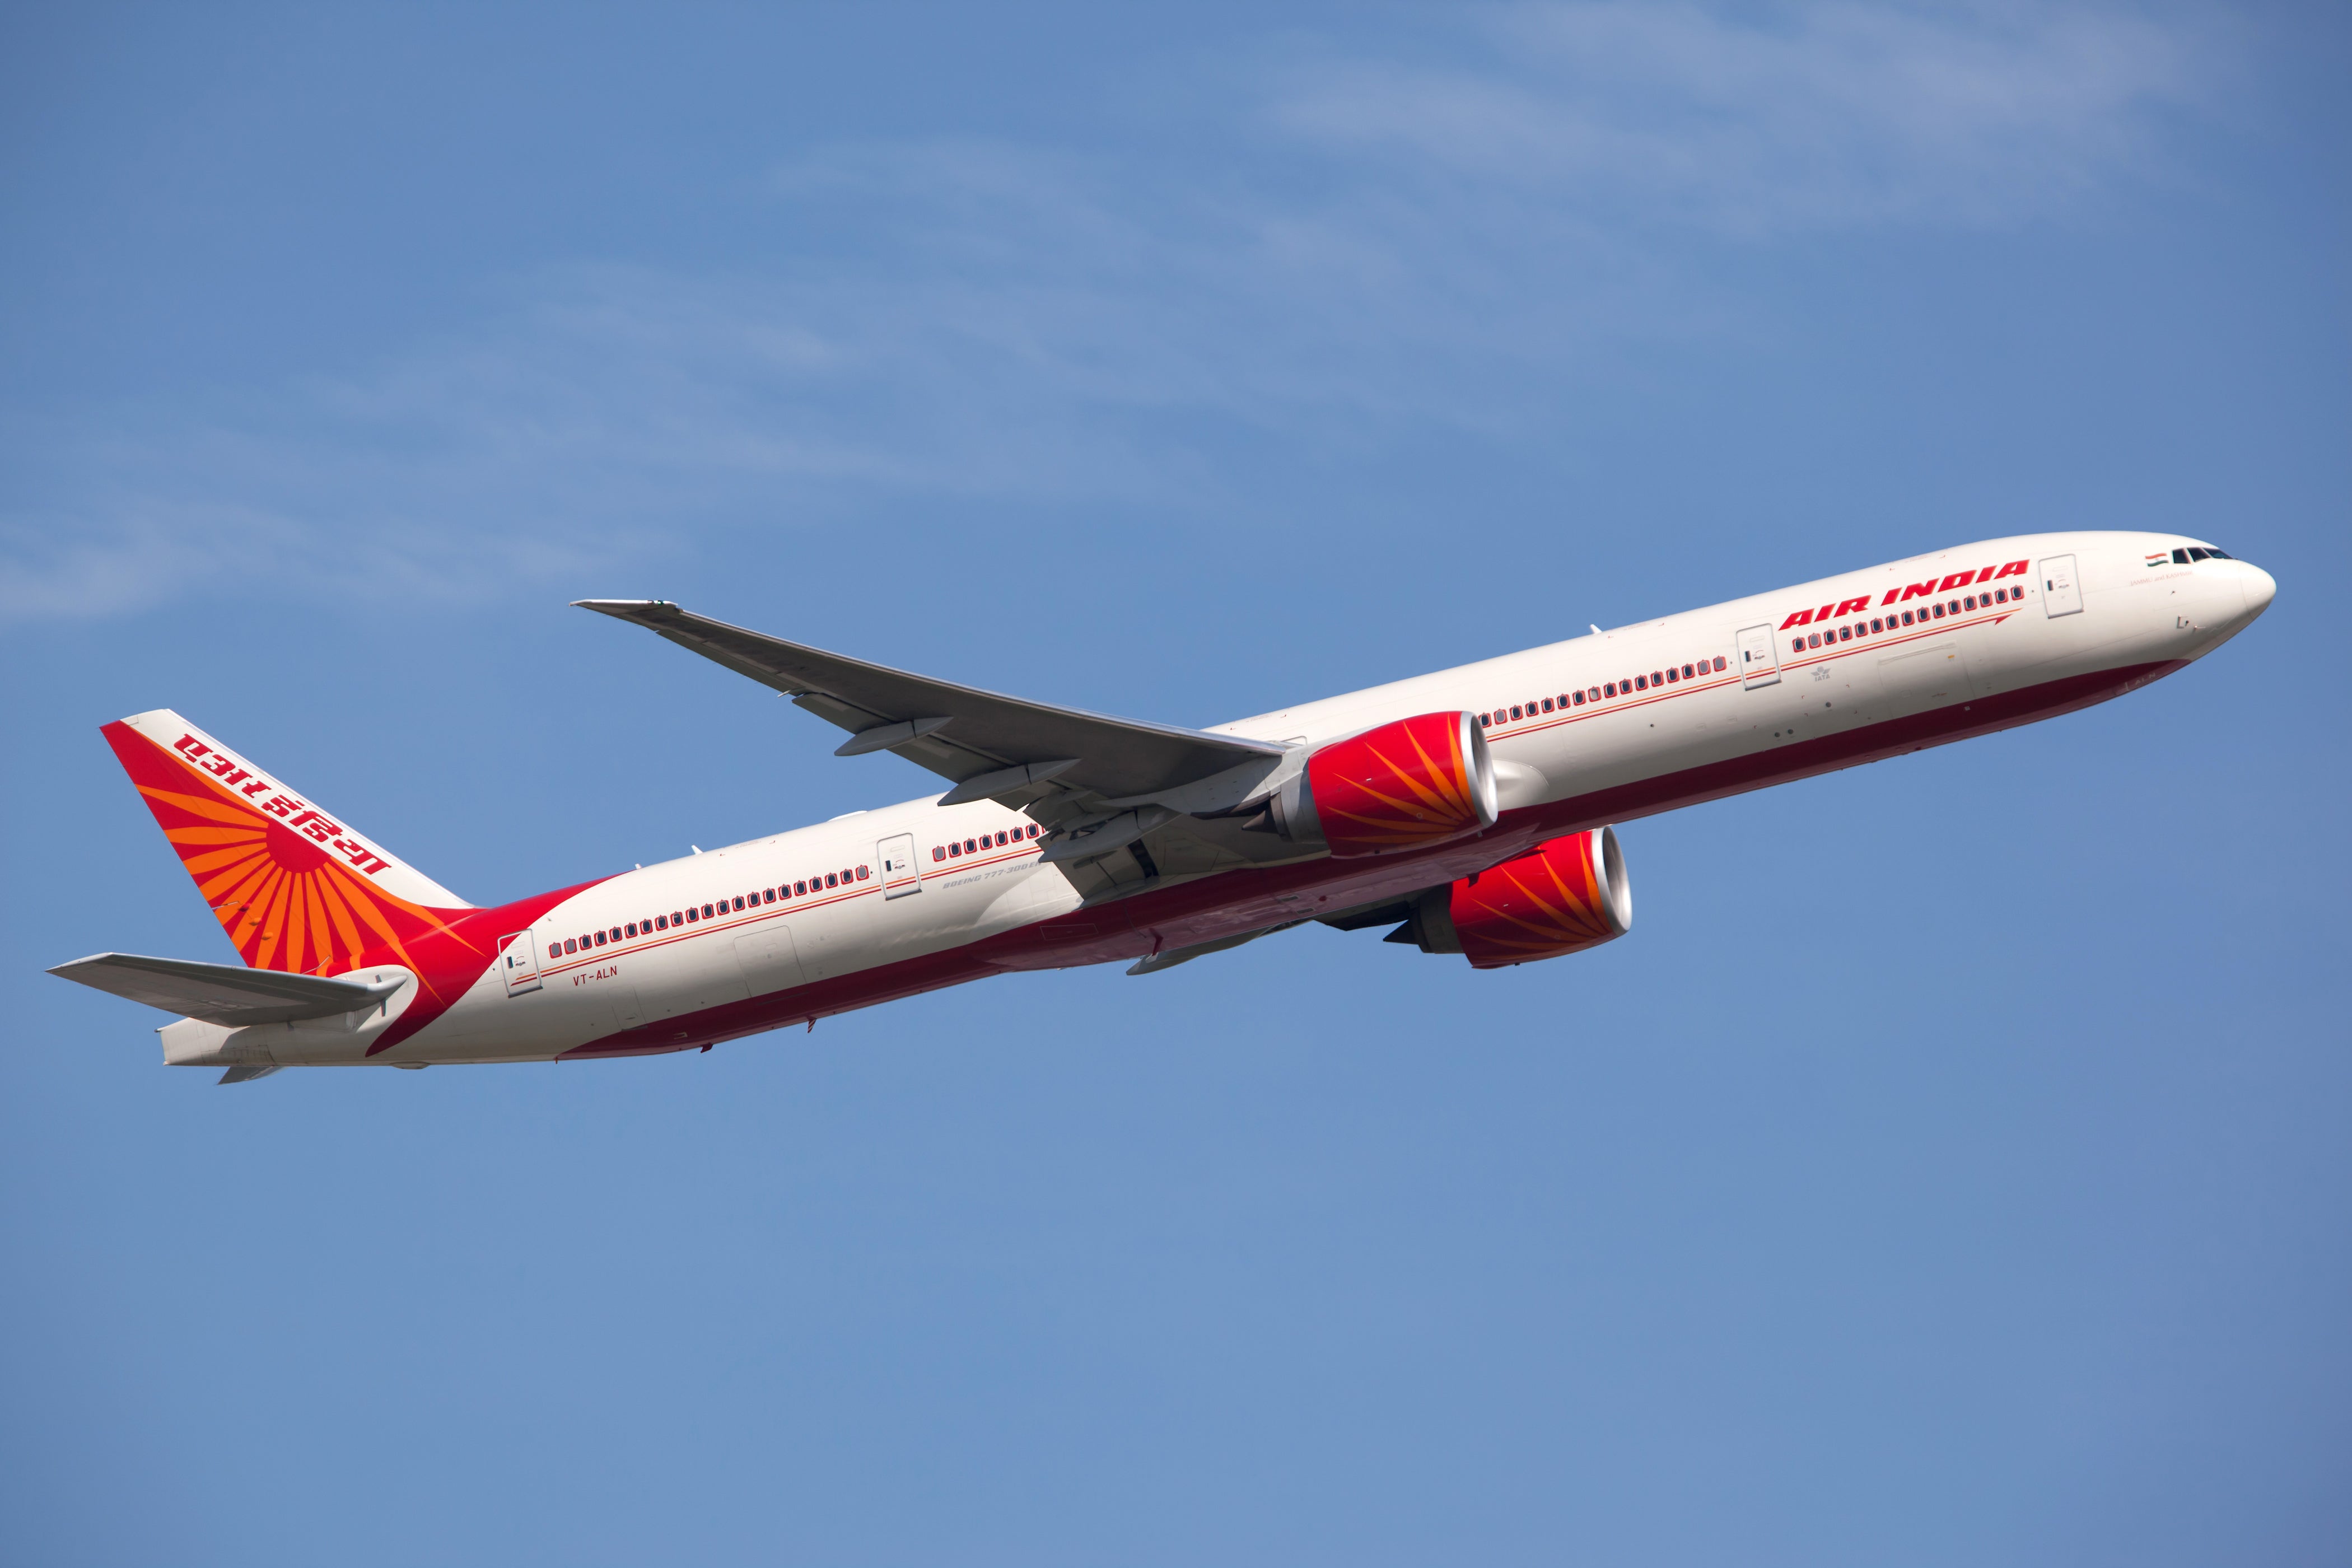 Air India was bought by Tata Group in January